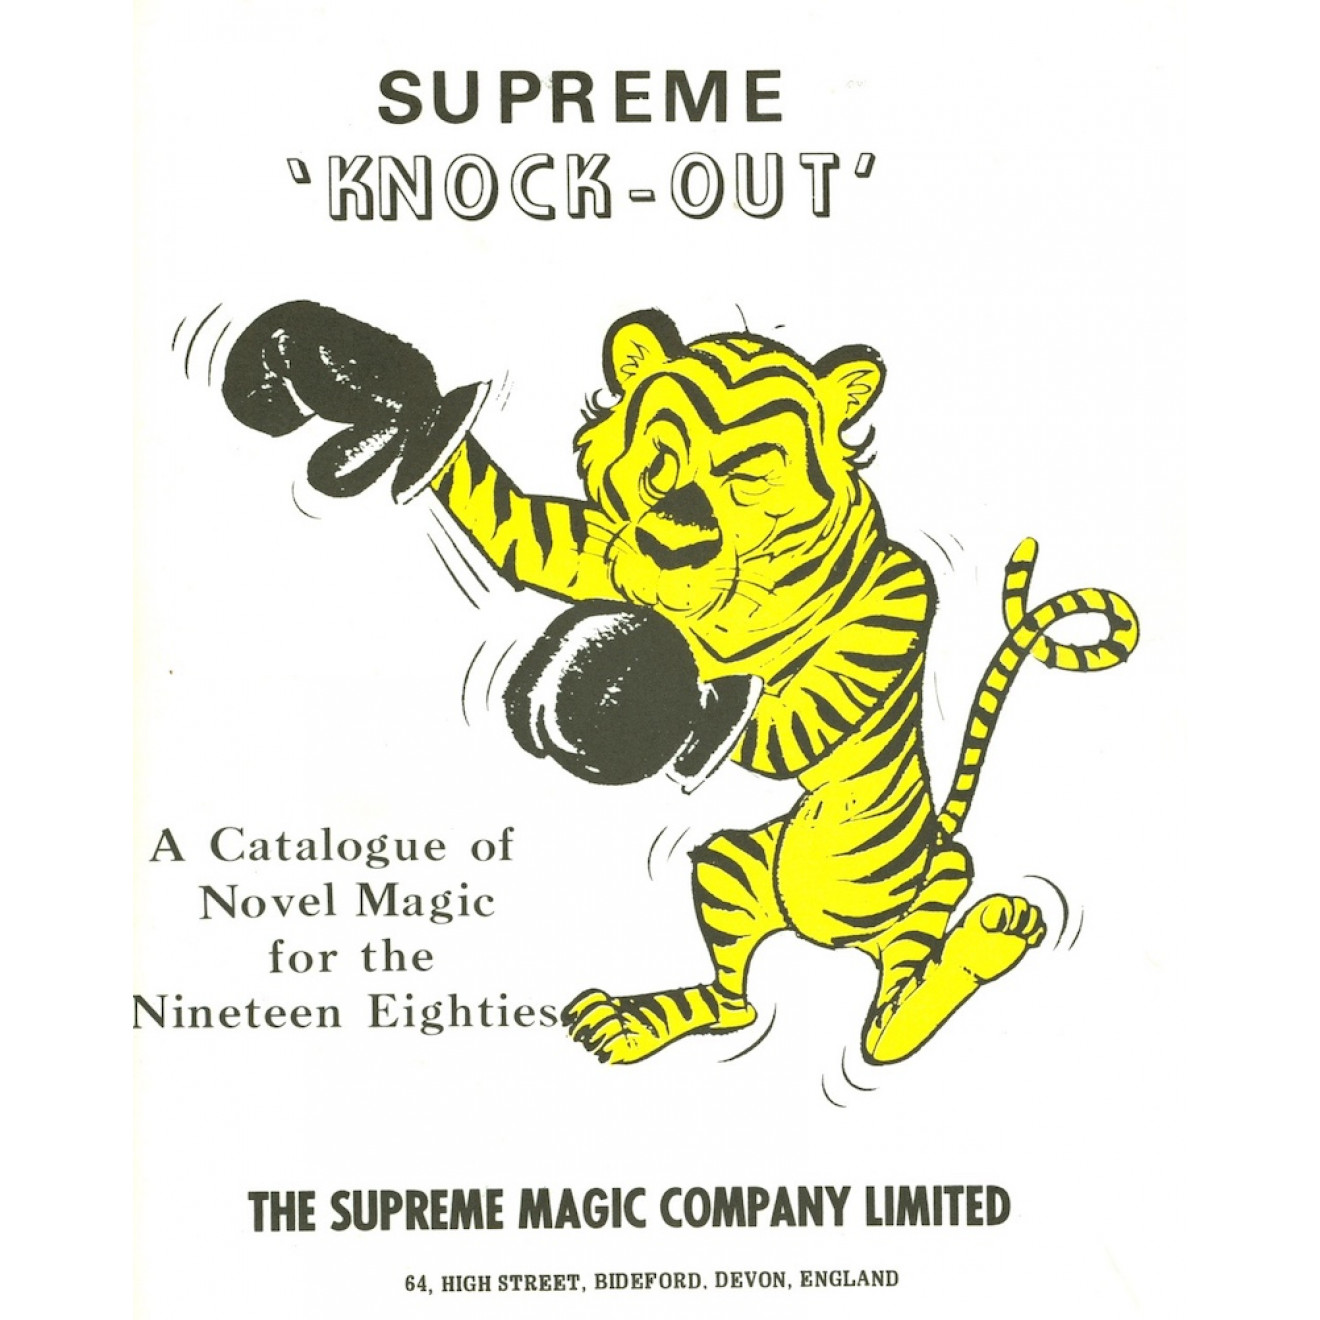 Supreme "Knock-Out"